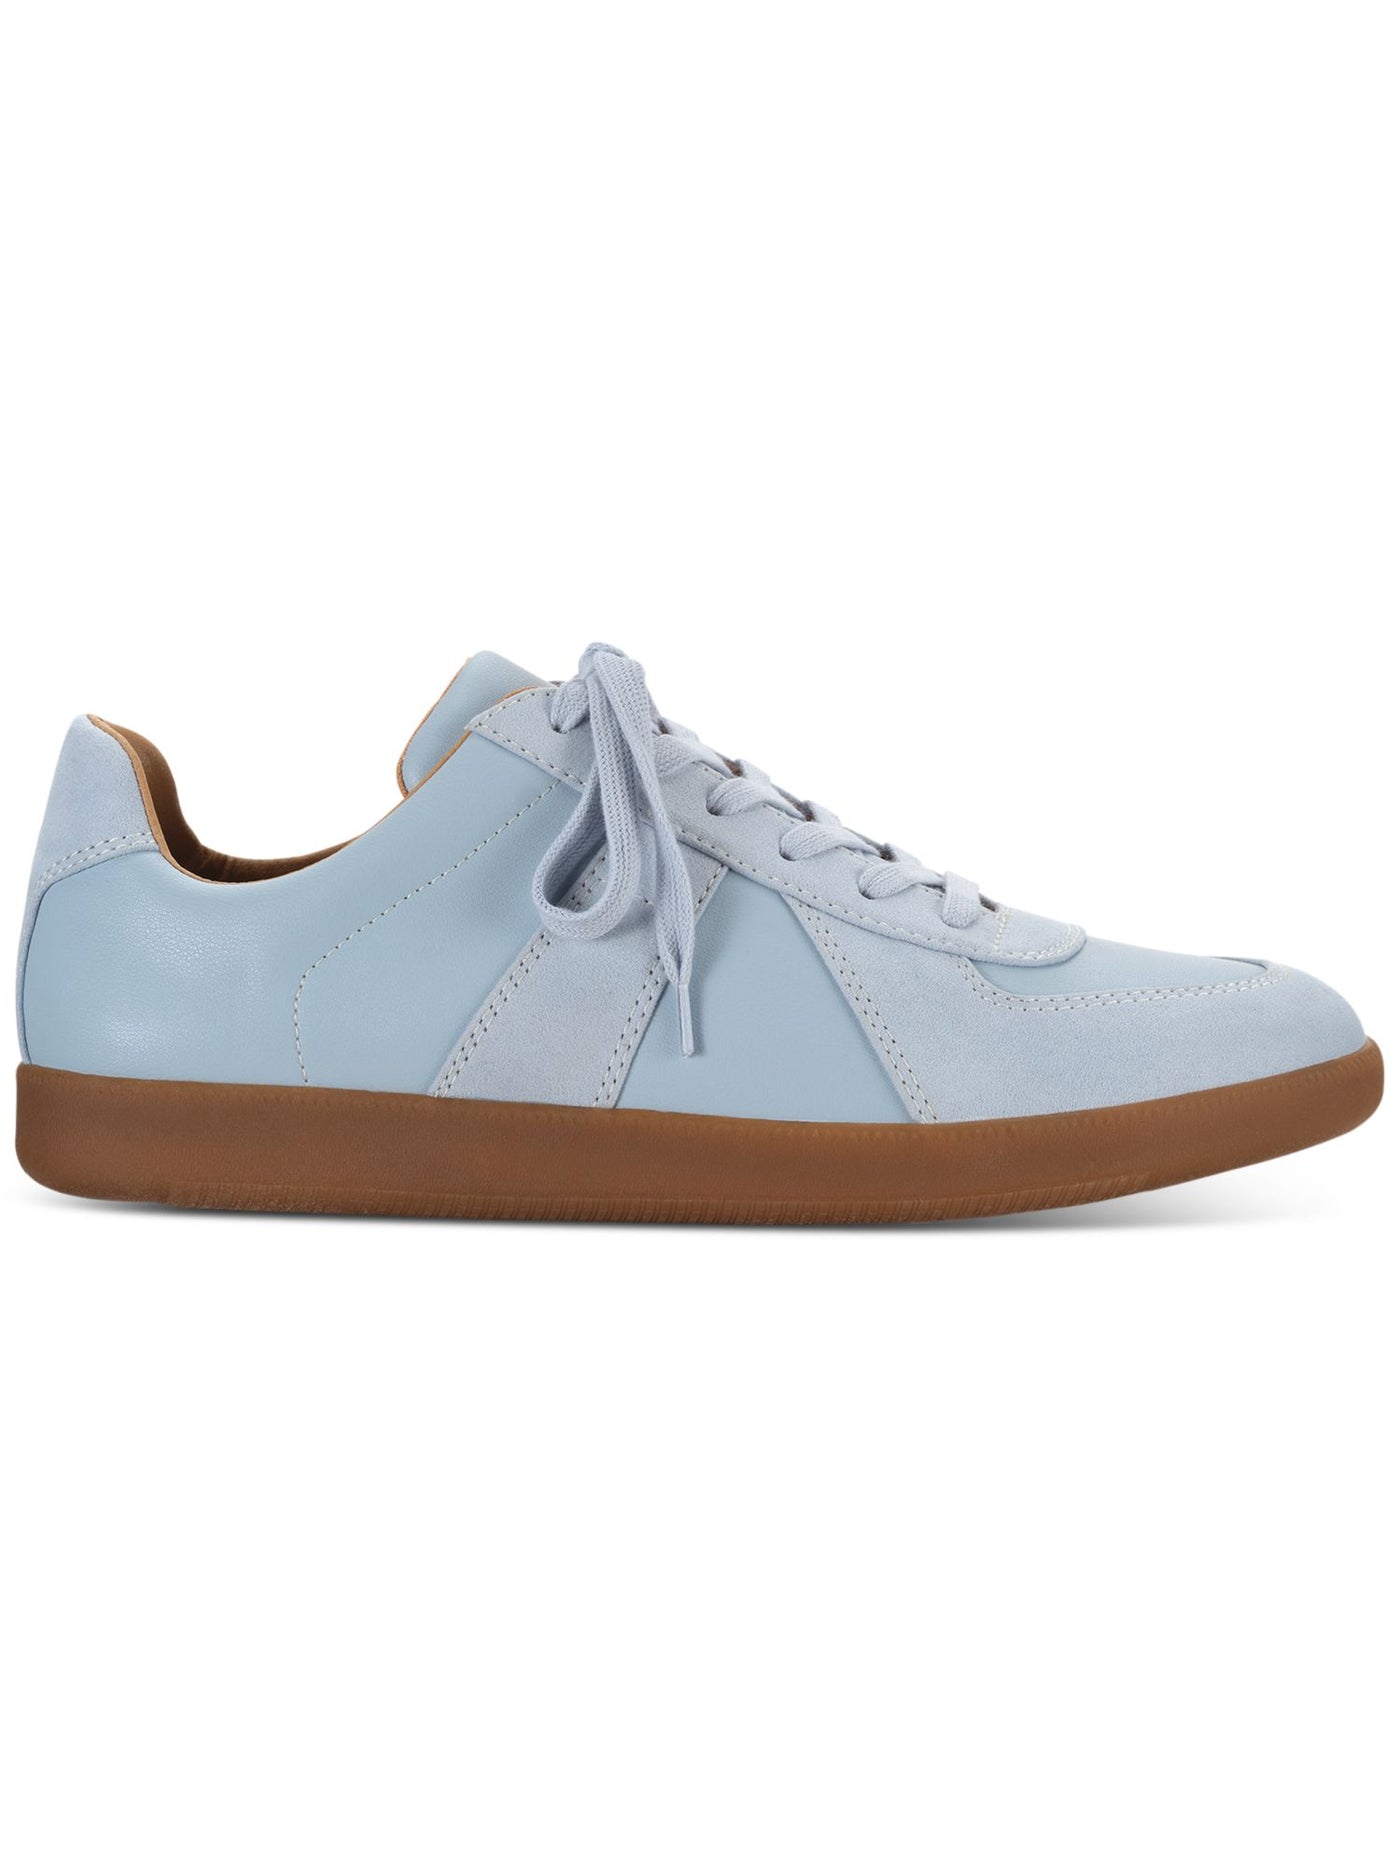 INC Mens Light Blue Padded Harlan Round Toe Platform Lace-Up Athletic Sneakers Shoes 9.5 M